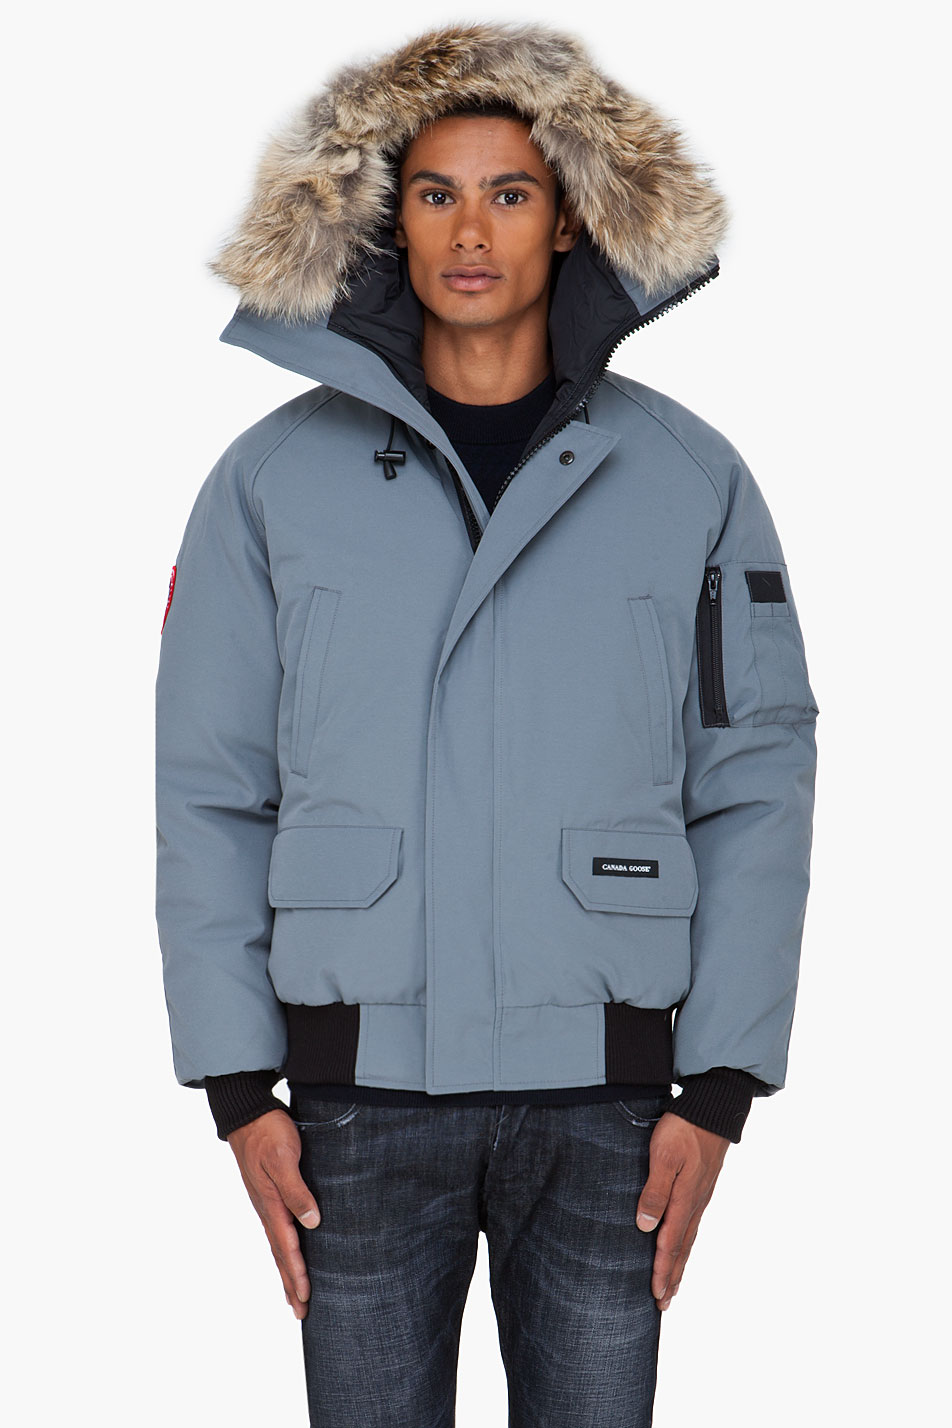 Canada Goose Charcoal Chilliwack Bomber Jacket in Blue for Men - Lyst